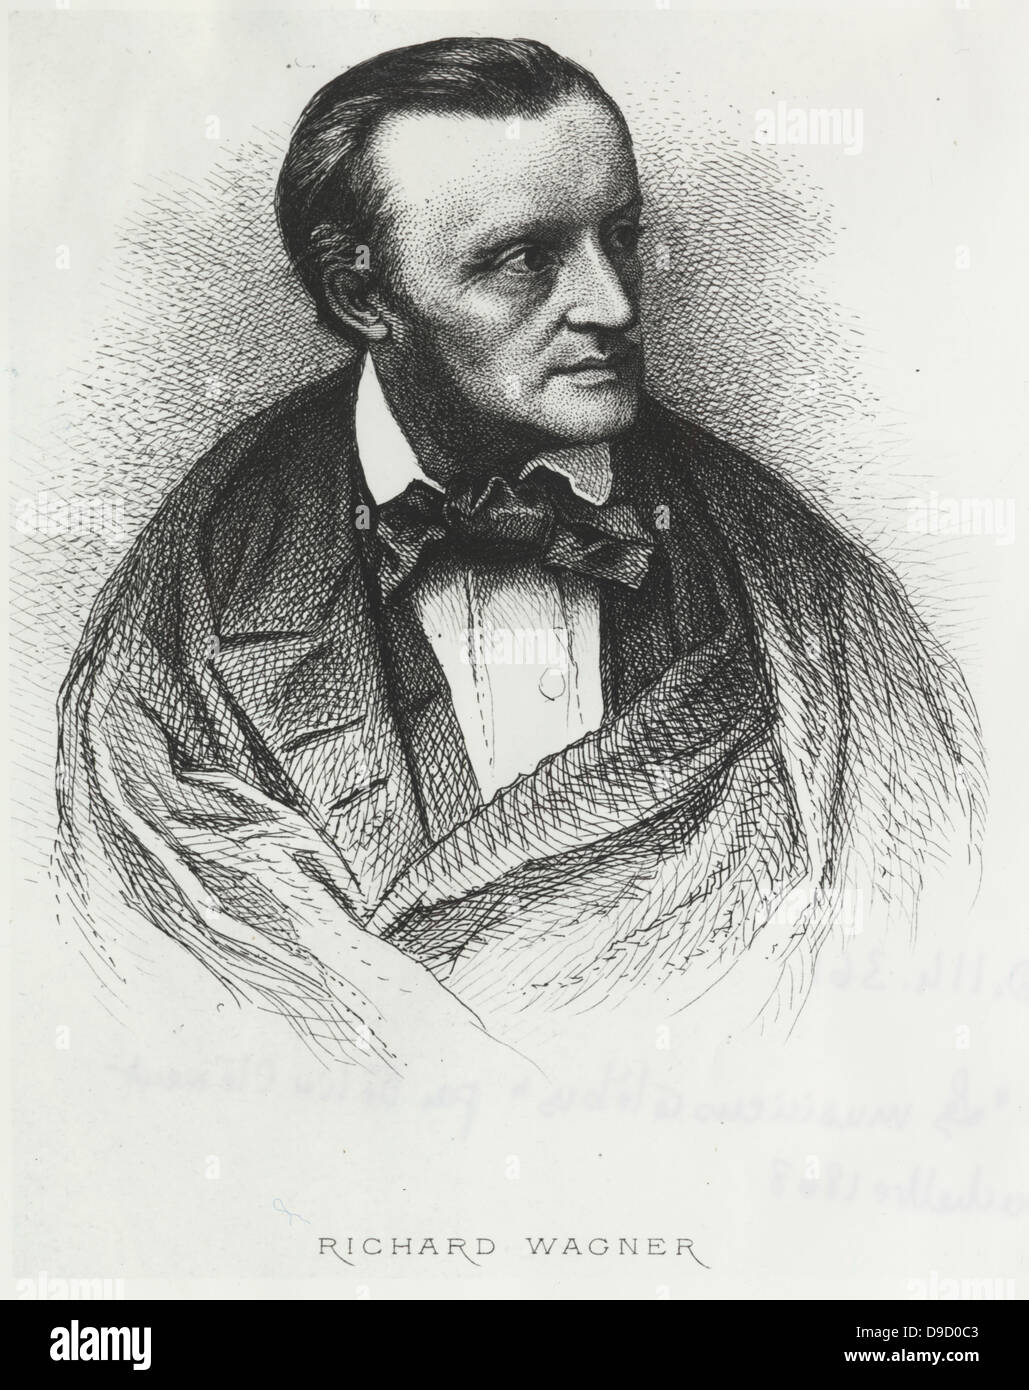 (Wilhelm) Richard Wagner (1813-1883) German composer, conductor, and theatre director. He built the Bayreuth Festspielhaus which opend in 1876 with Das Rheingold to stage his music dramas Stock Photo